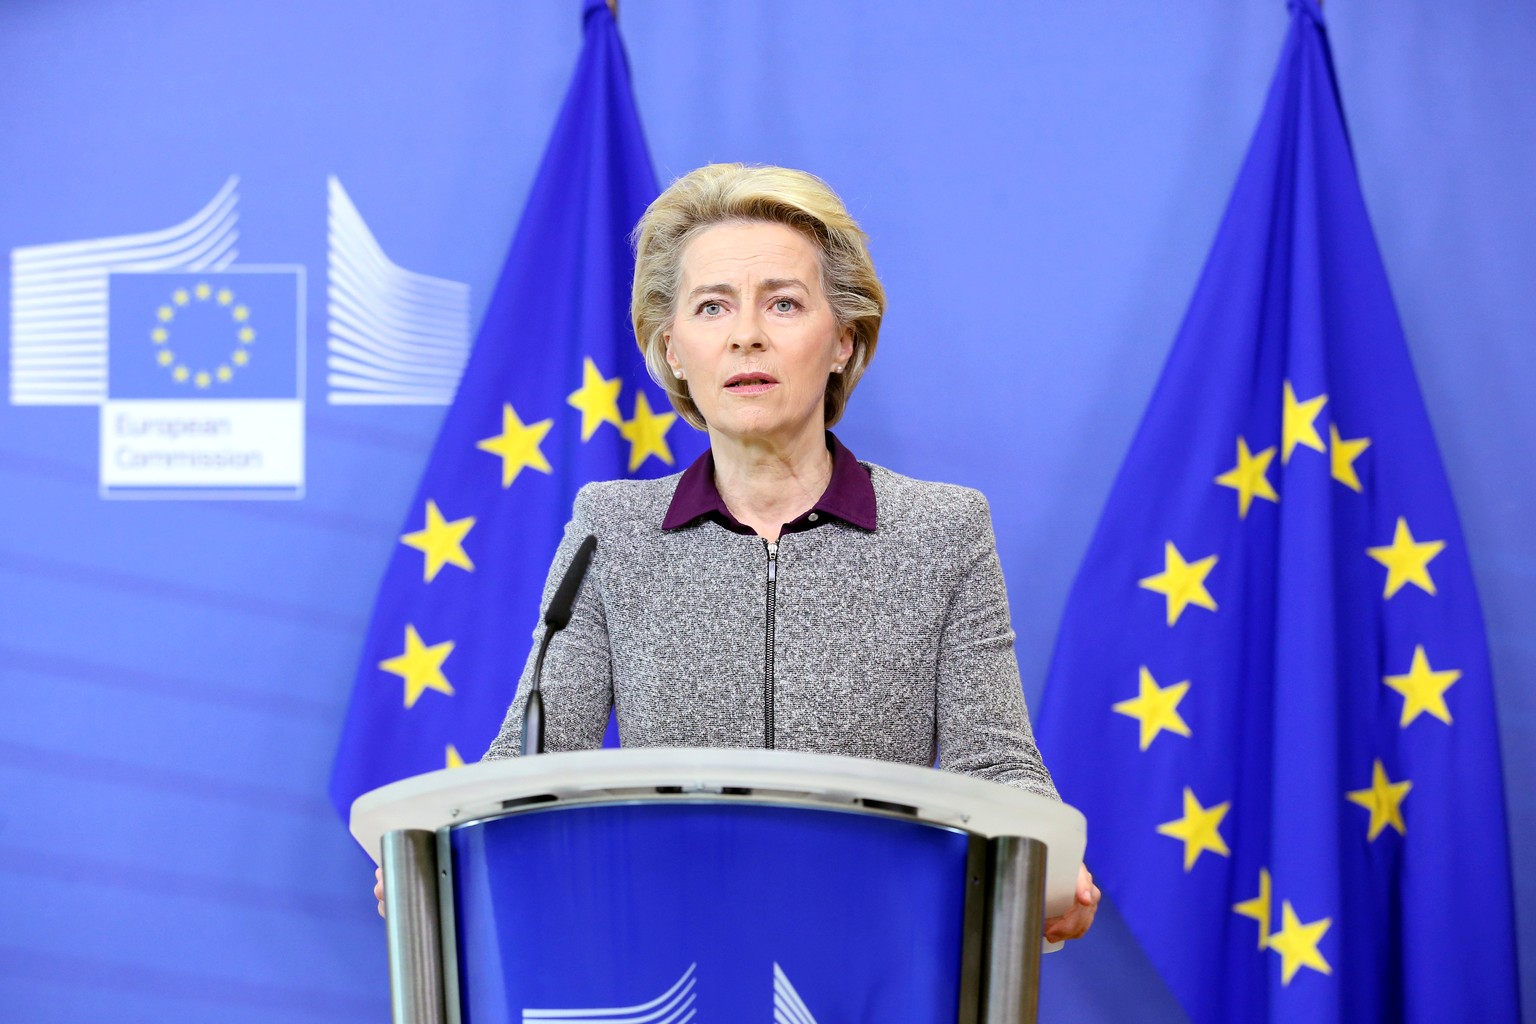 European Commission President Ursula von der Leyen addresses a news conference following the resignation of the EU trade commissioner Phil Hogan, in Brussels, Belgium, August 27, 2020. Francois Walsch ...